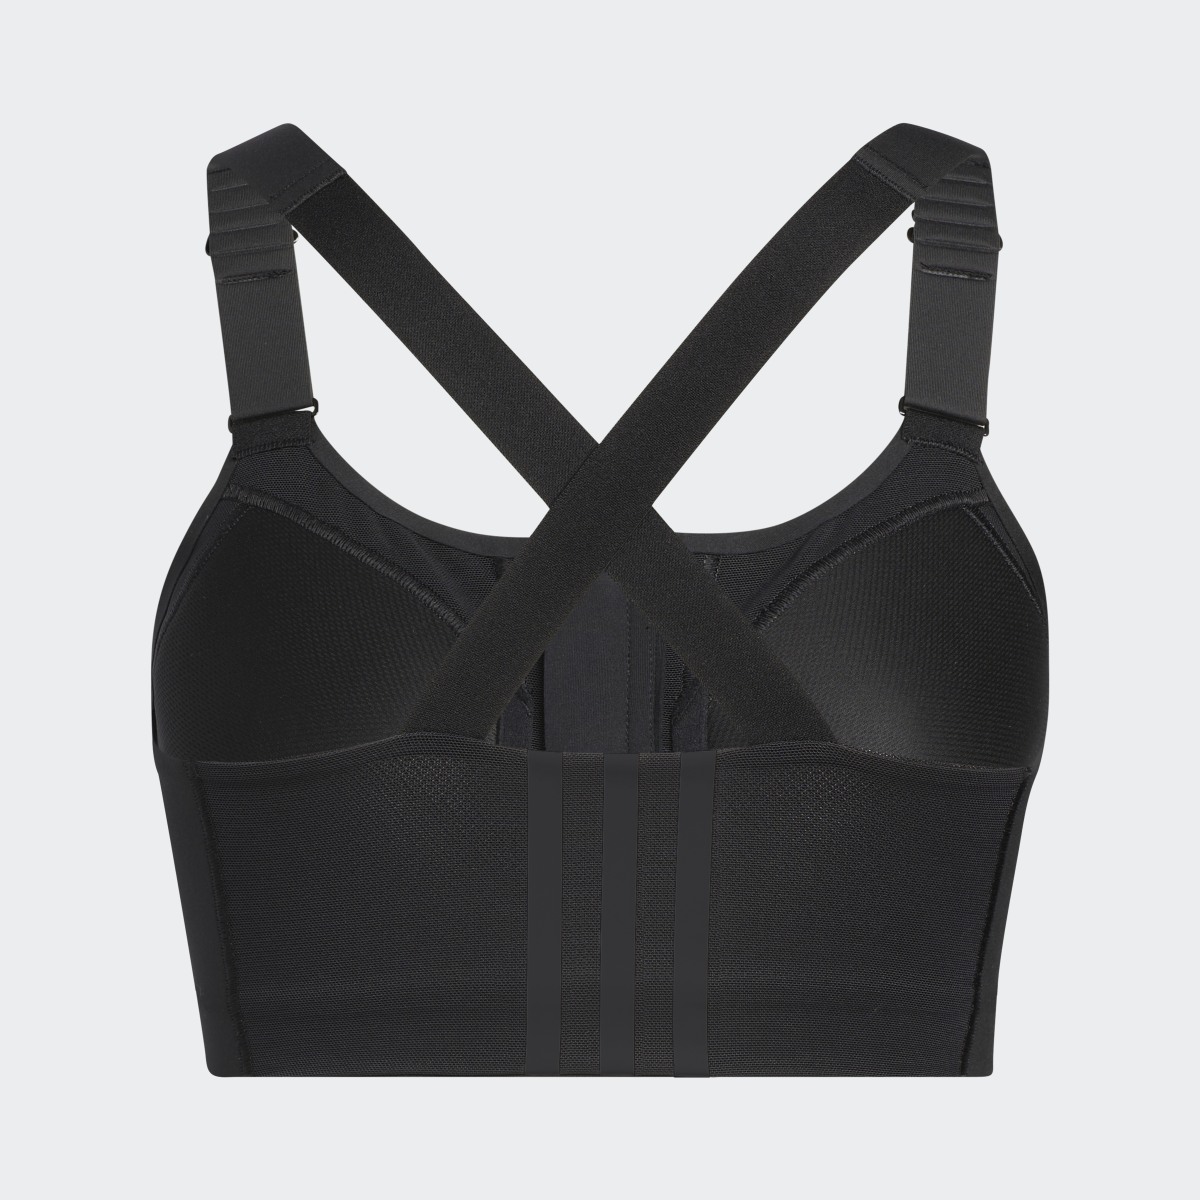 Adidas TLRD Impact Luxe Training High-Support Zip Bra. 8